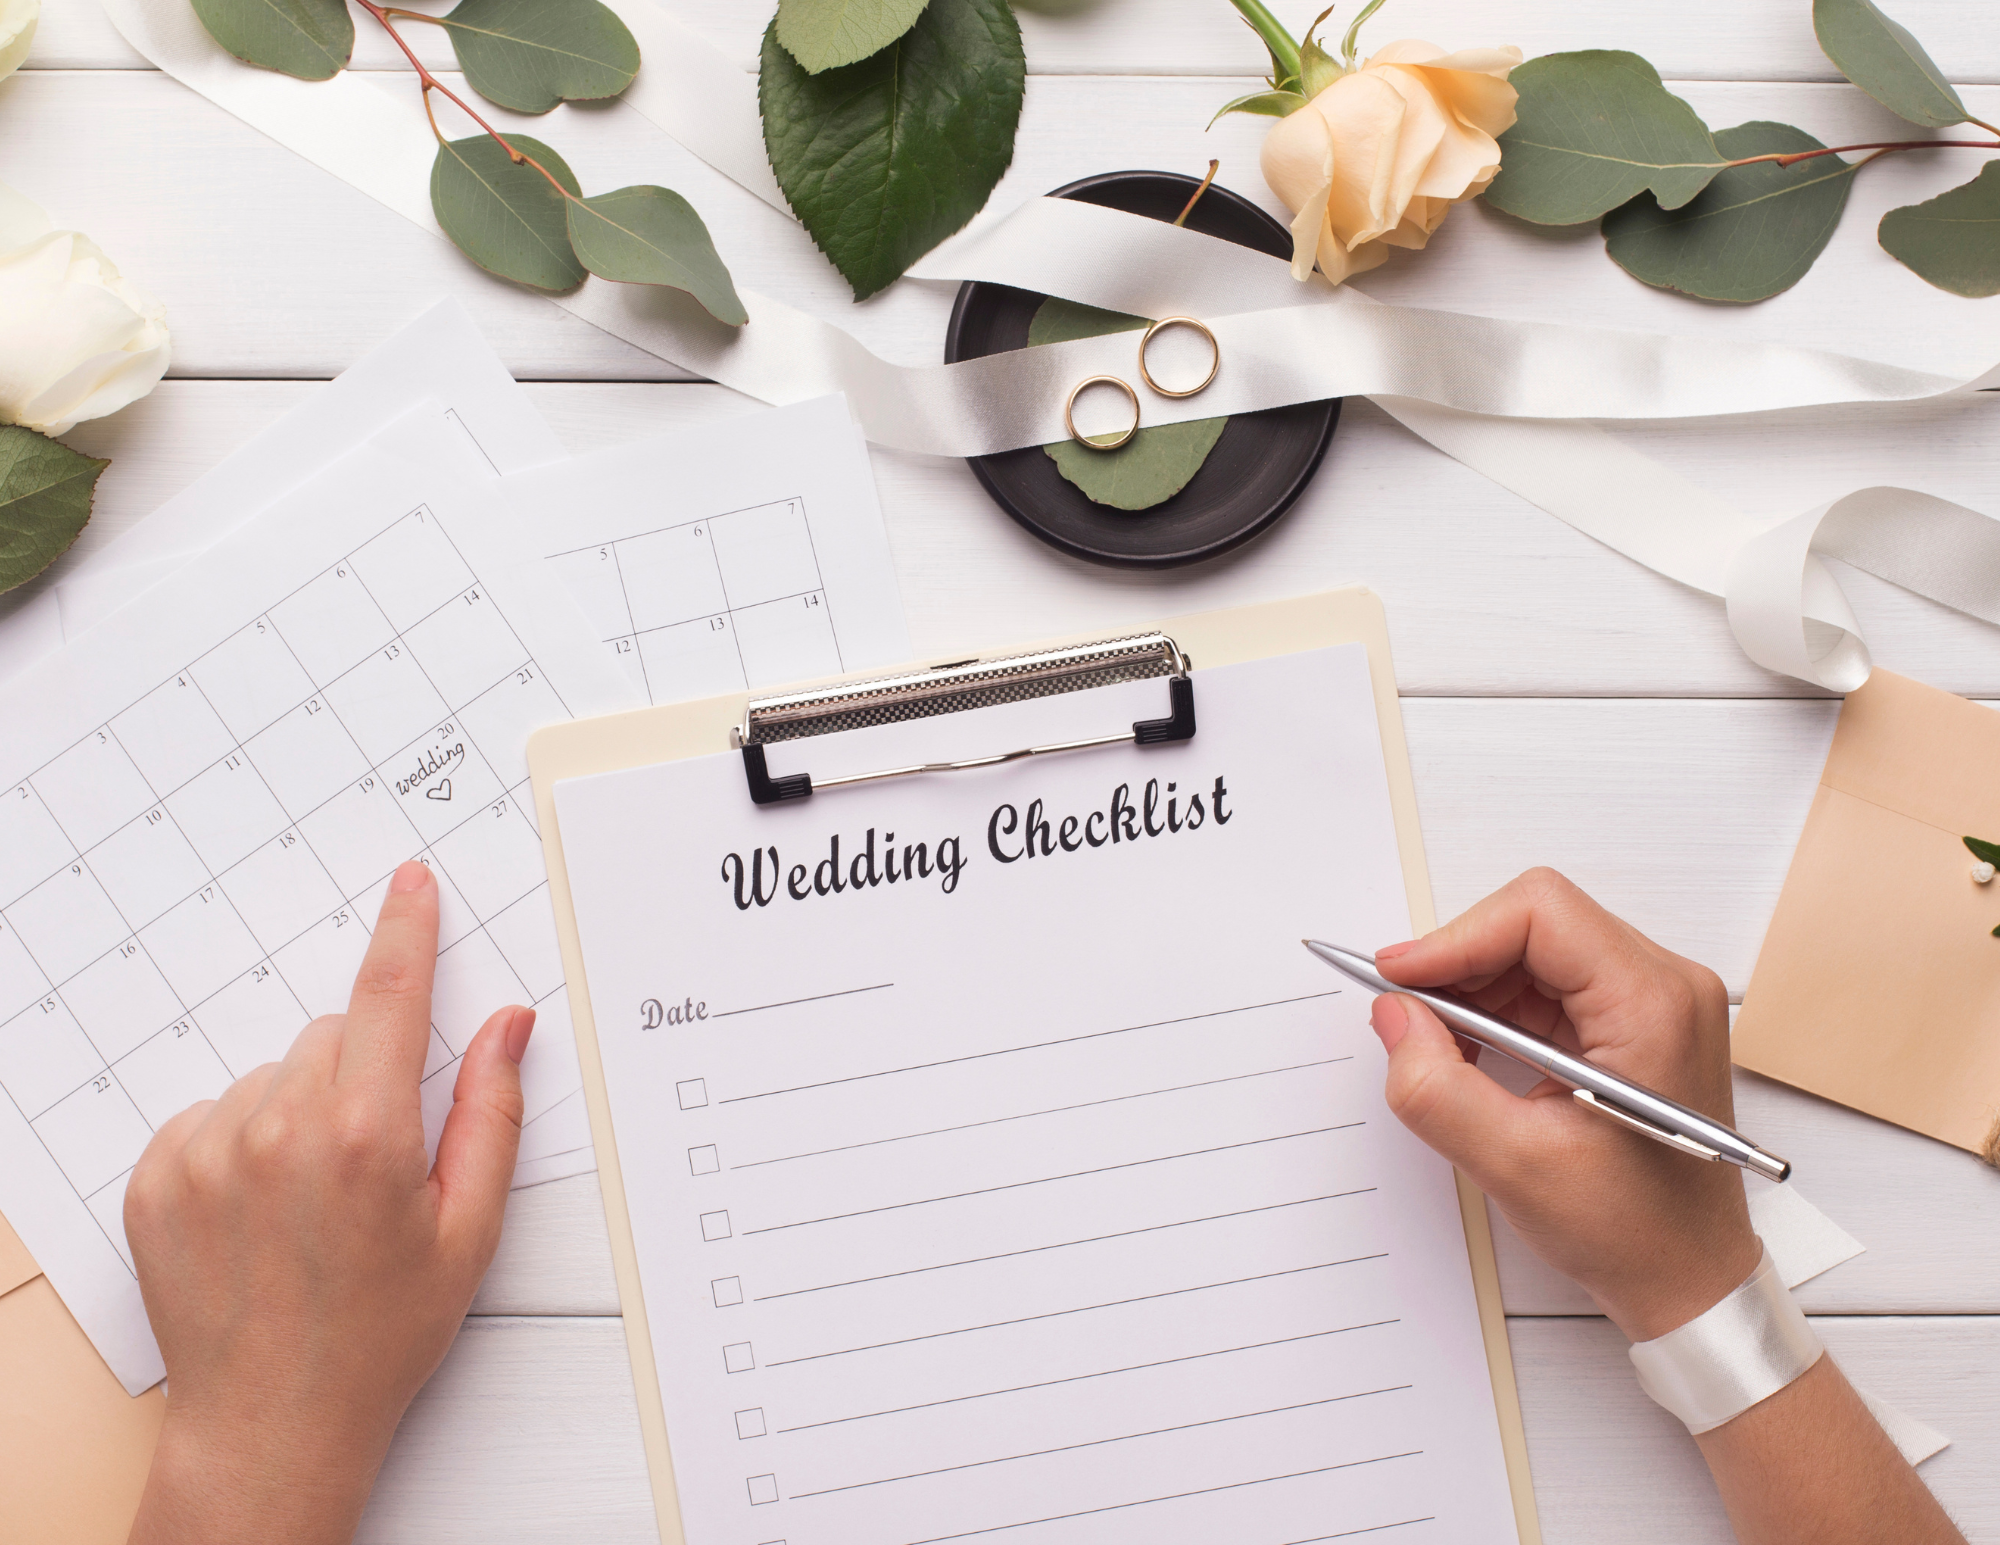 Wedding planning checklist with real florals in the background and wedding rings in a dish